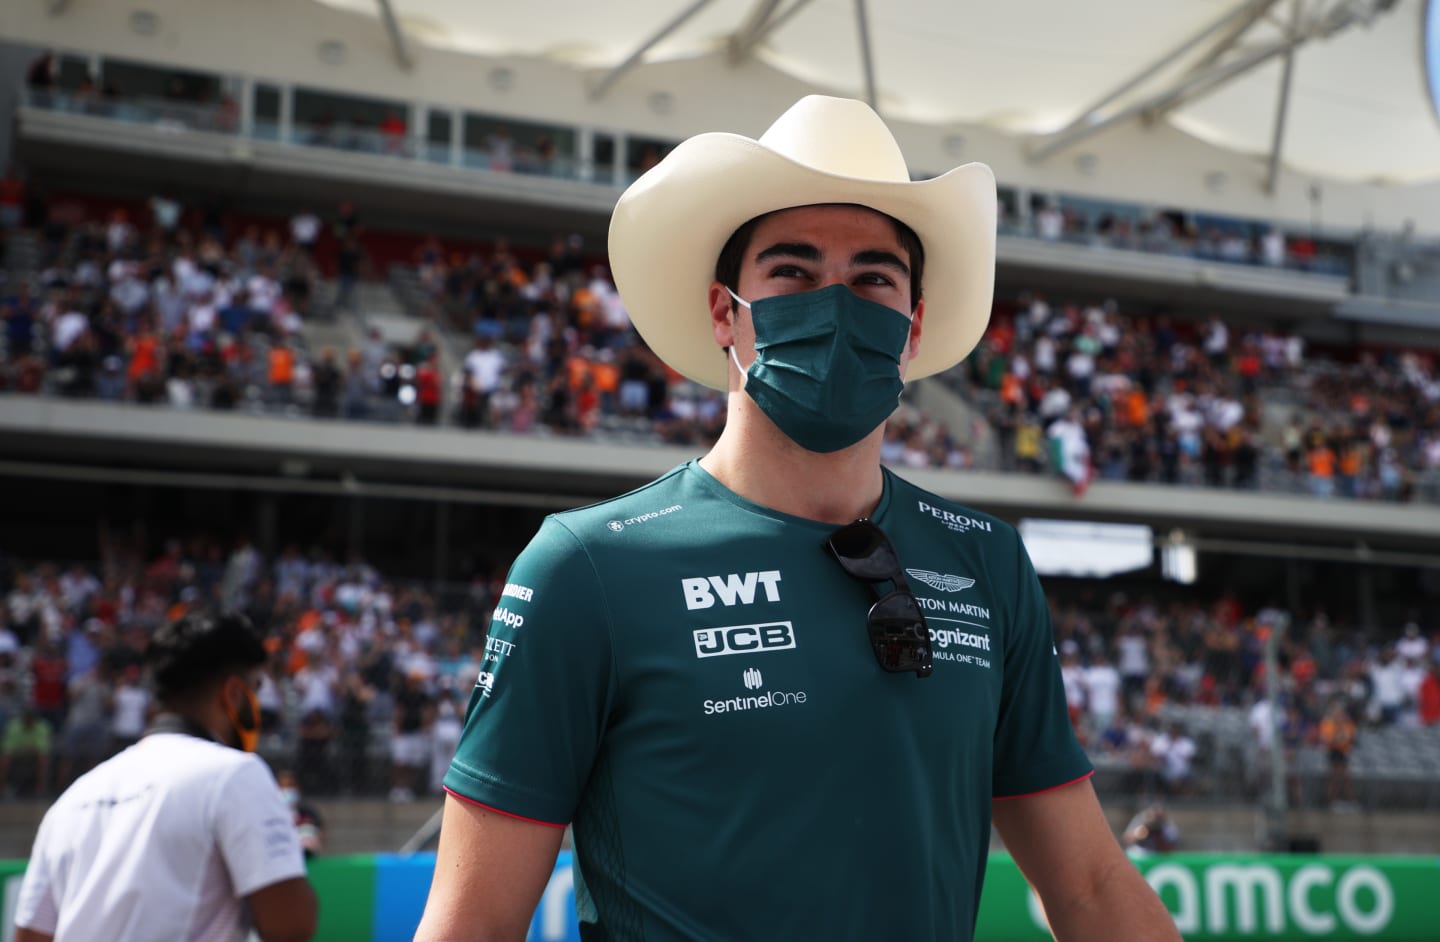 AUSTIN, TEXAS - OCTOBER 24: Lance Stroll of Canada and Aston Martin F1 Team walks in the Paddock before the F1 Grand Prix of USA at Circuit of The Americas on October 24, 2021 in Austin, Texas. (Photo by Chris Graythen/Getty Images)